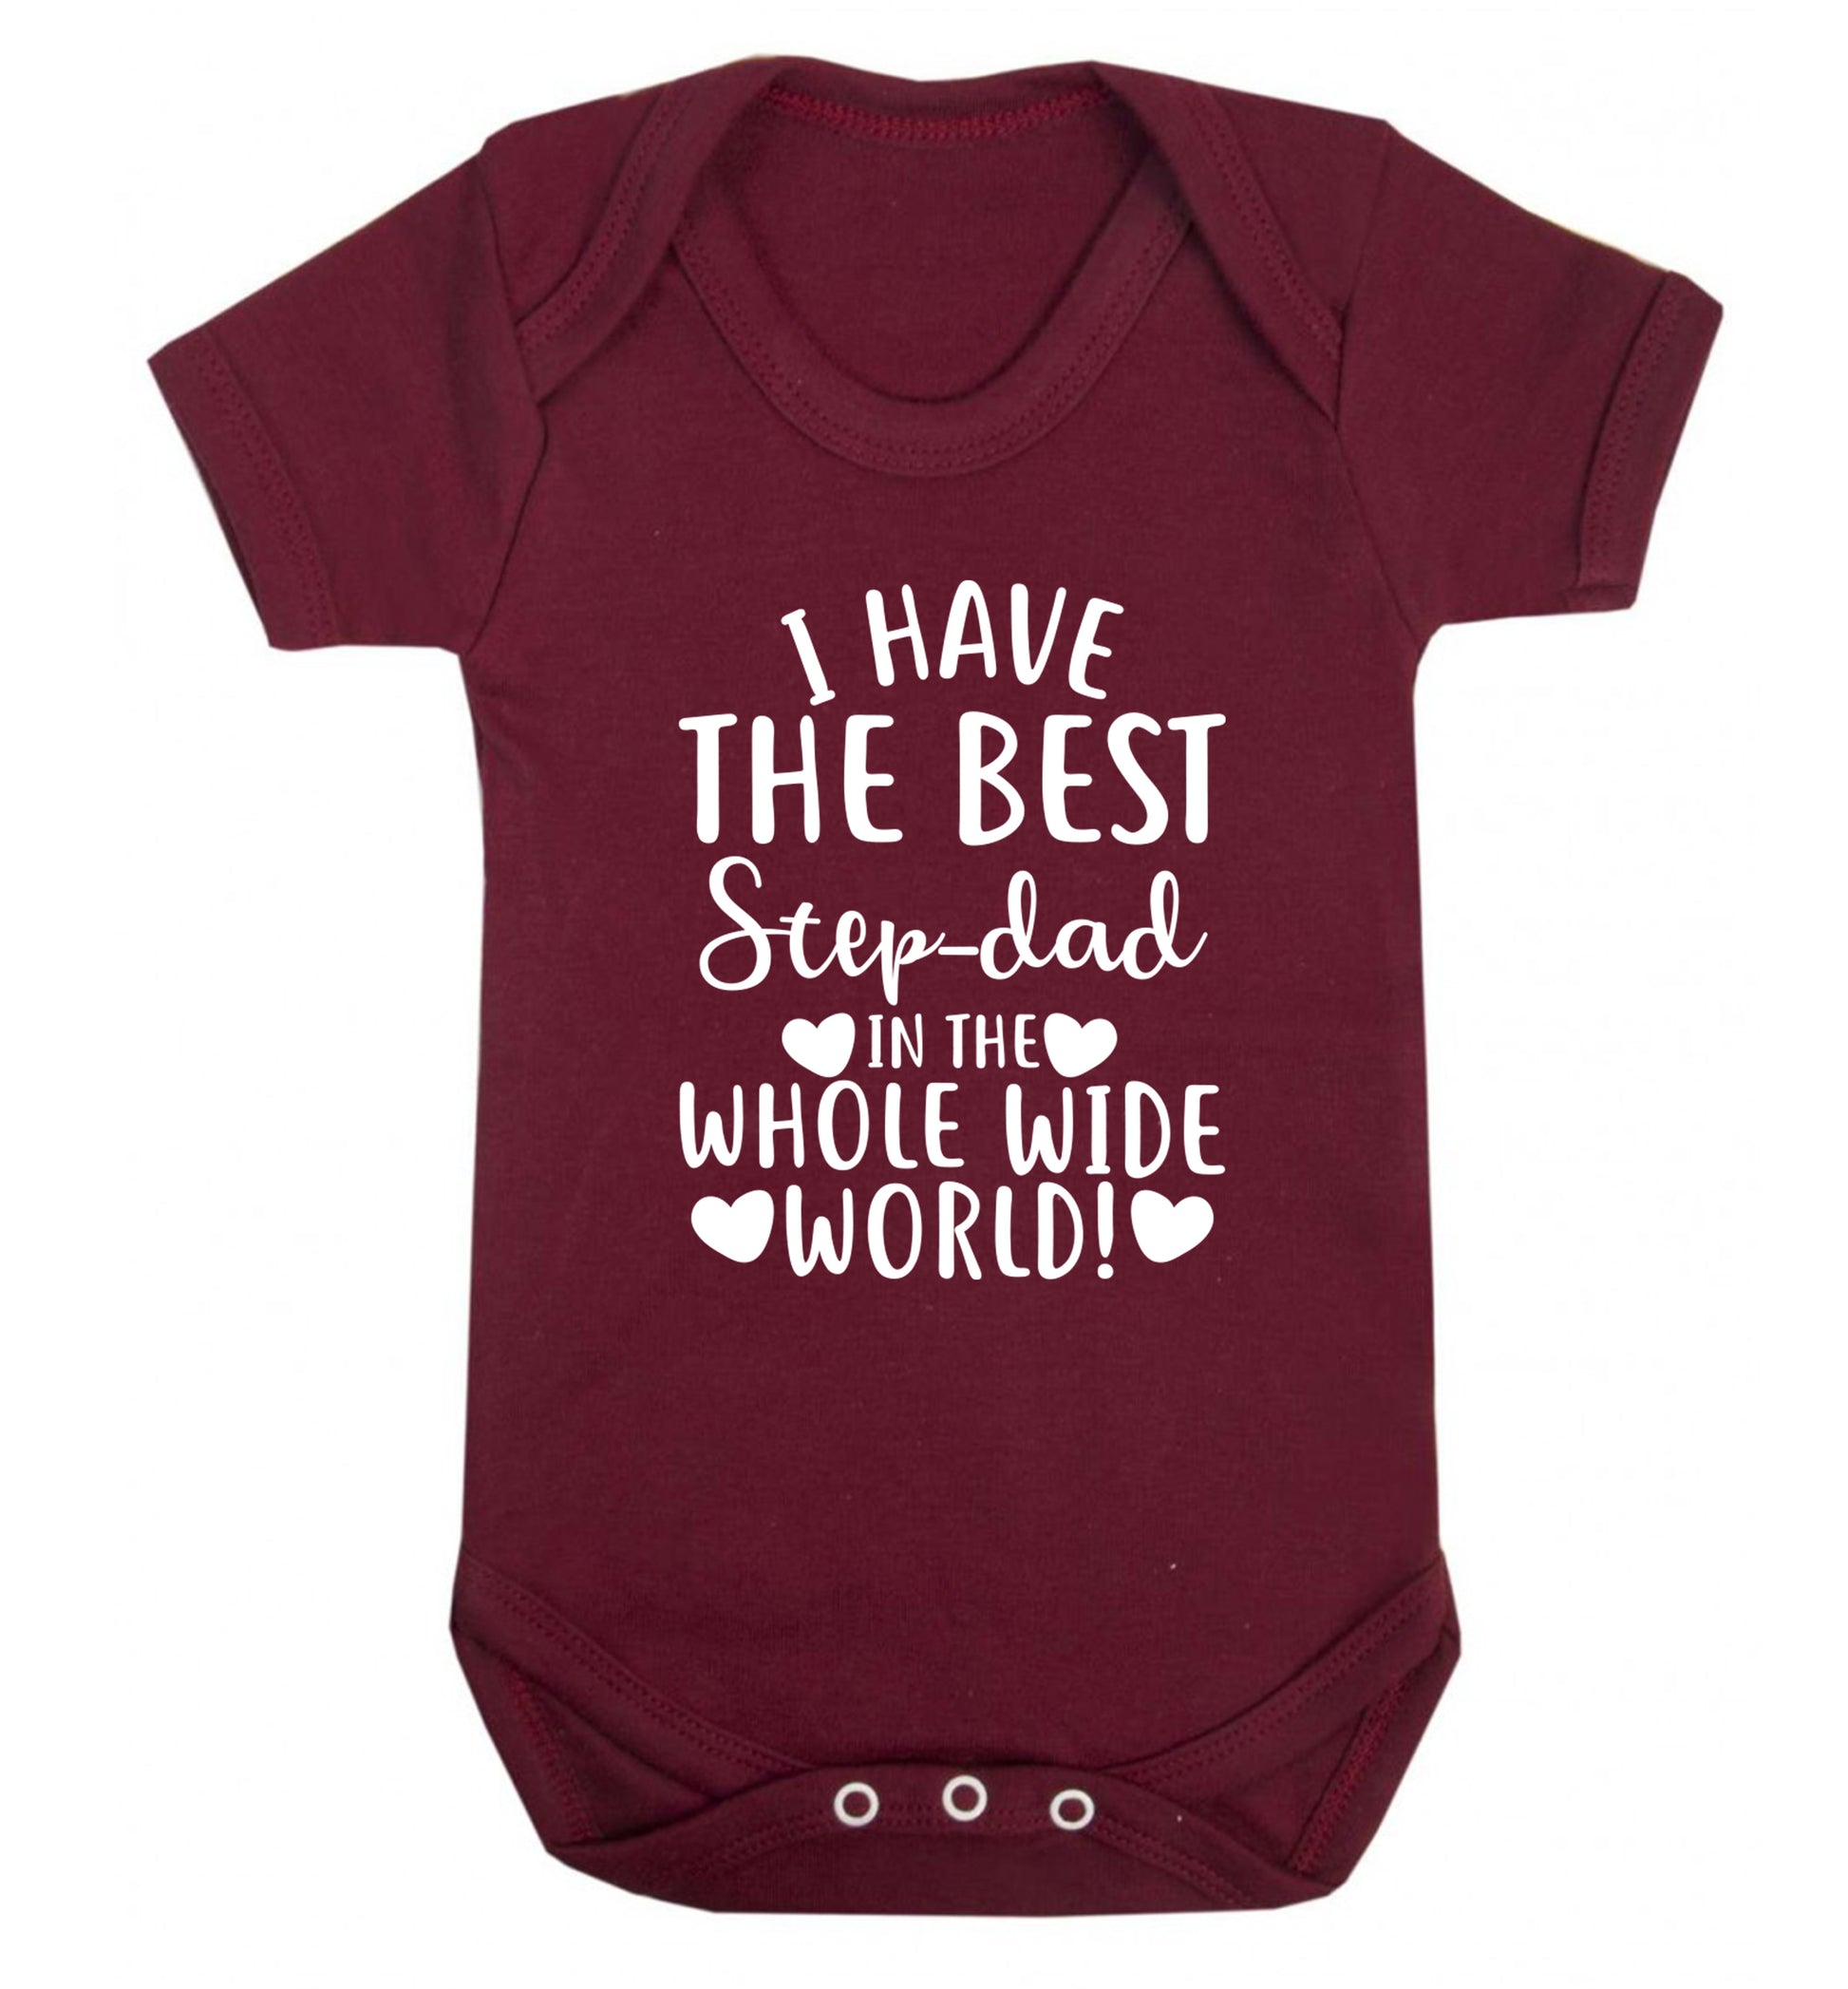 I have the best step-dad in the whole wide world! Baby Vest maroon 18-24 months